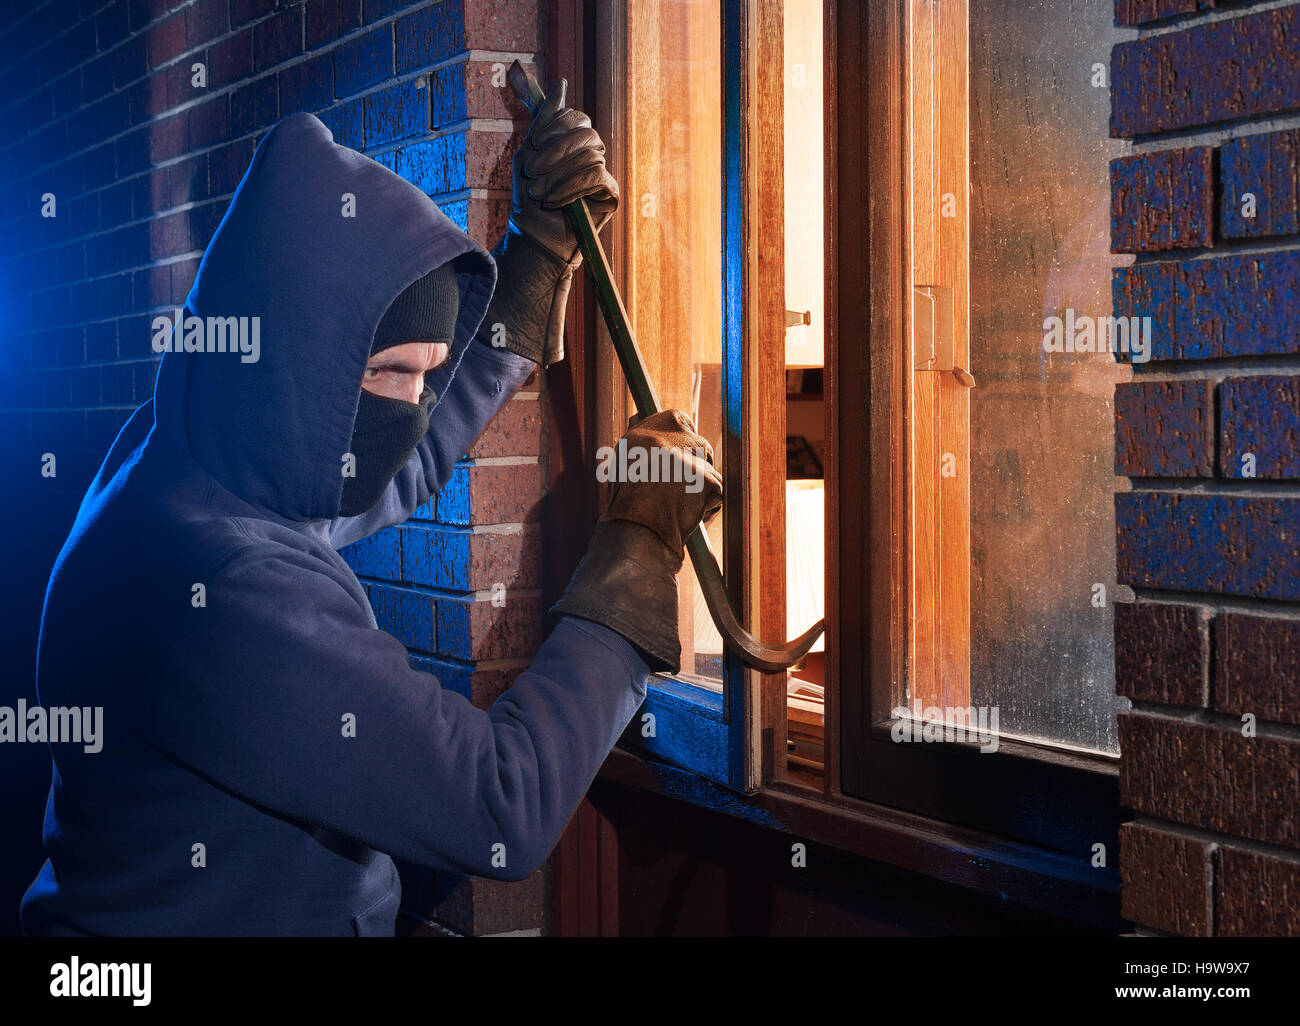 Hooded burglar ransacking a jewelry box in a home Stock Photo